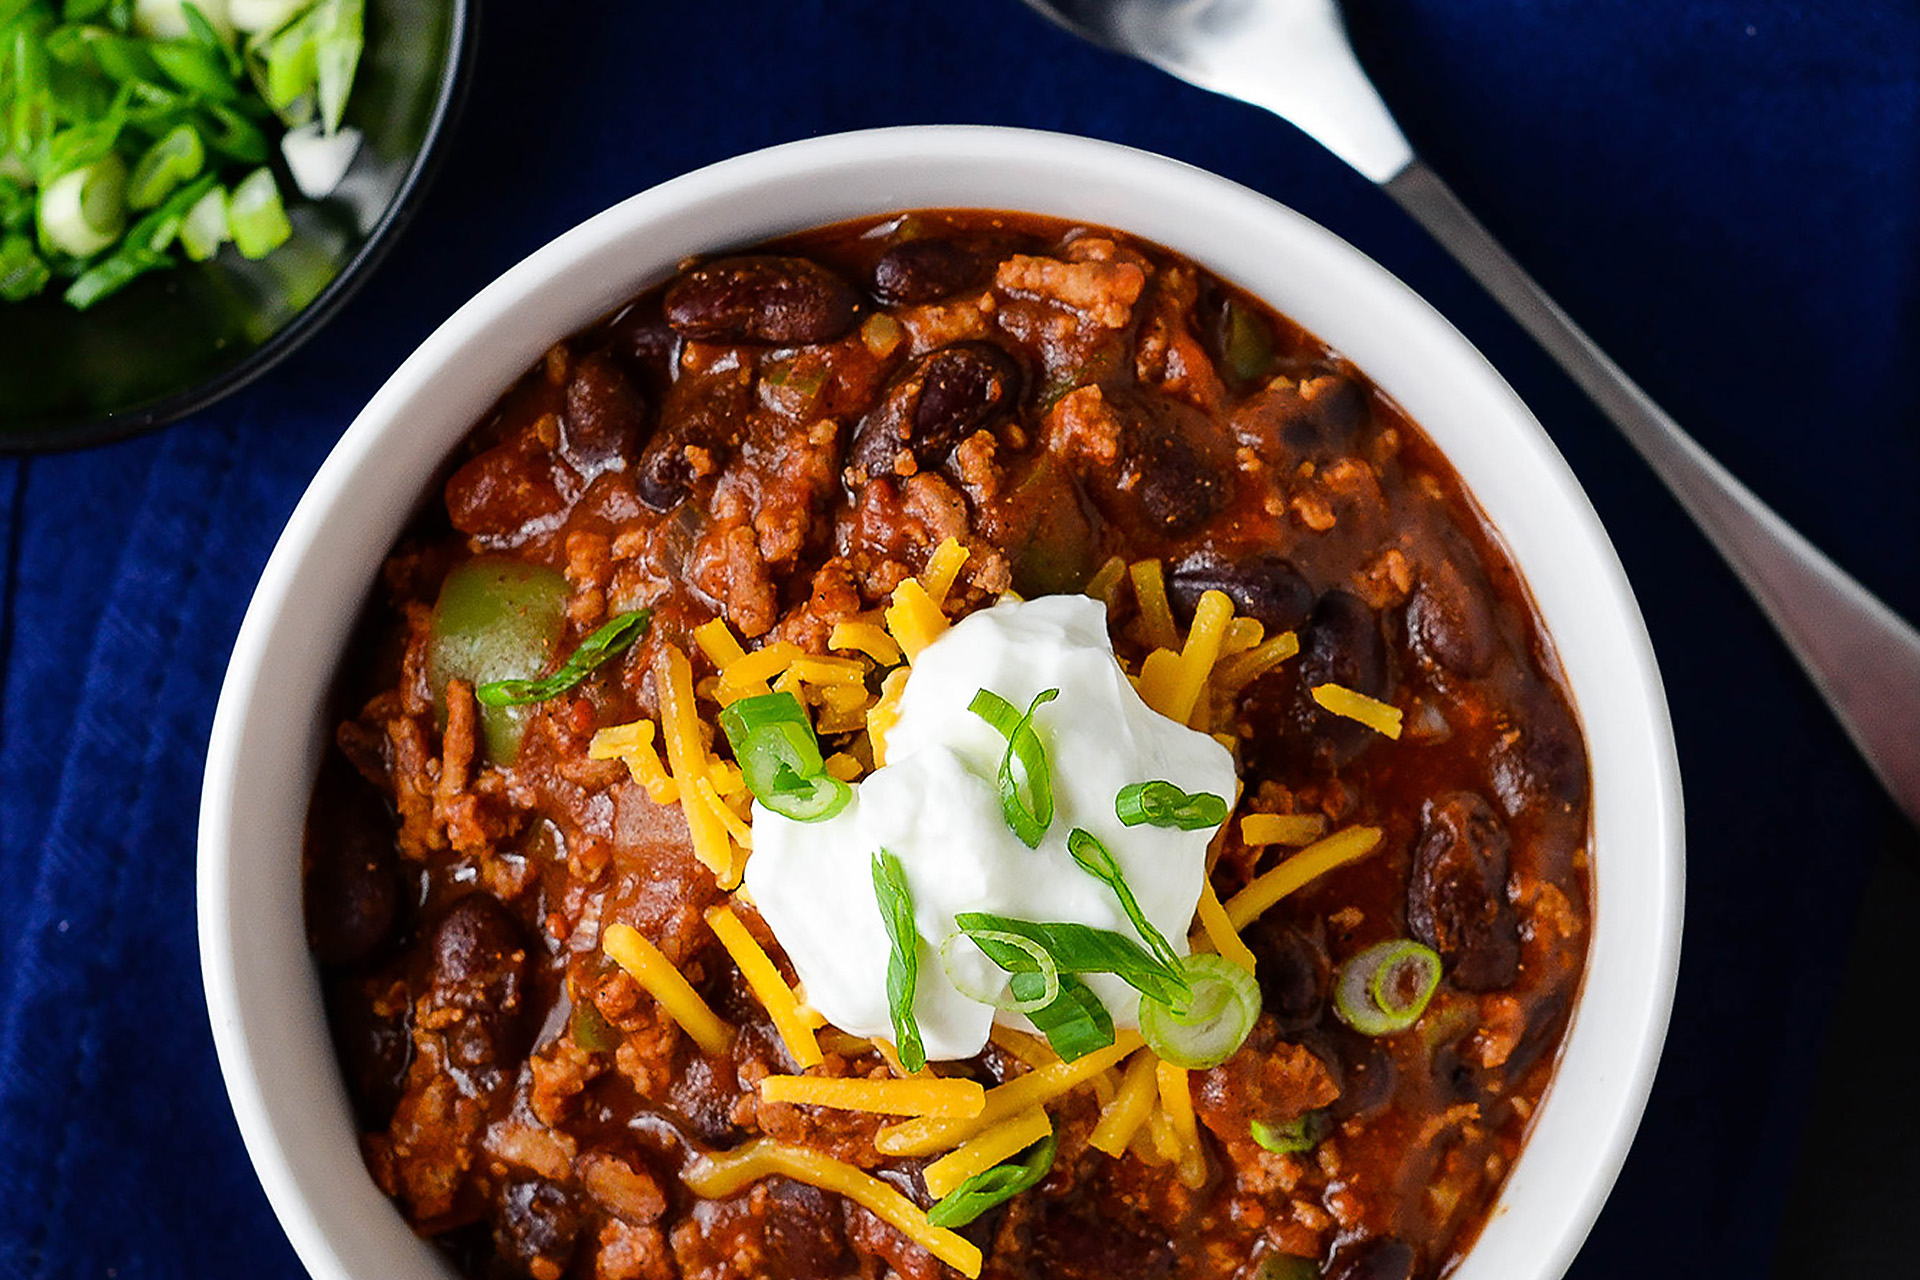 Beef and bean chili topped with sour cream and green onions in a white bowl